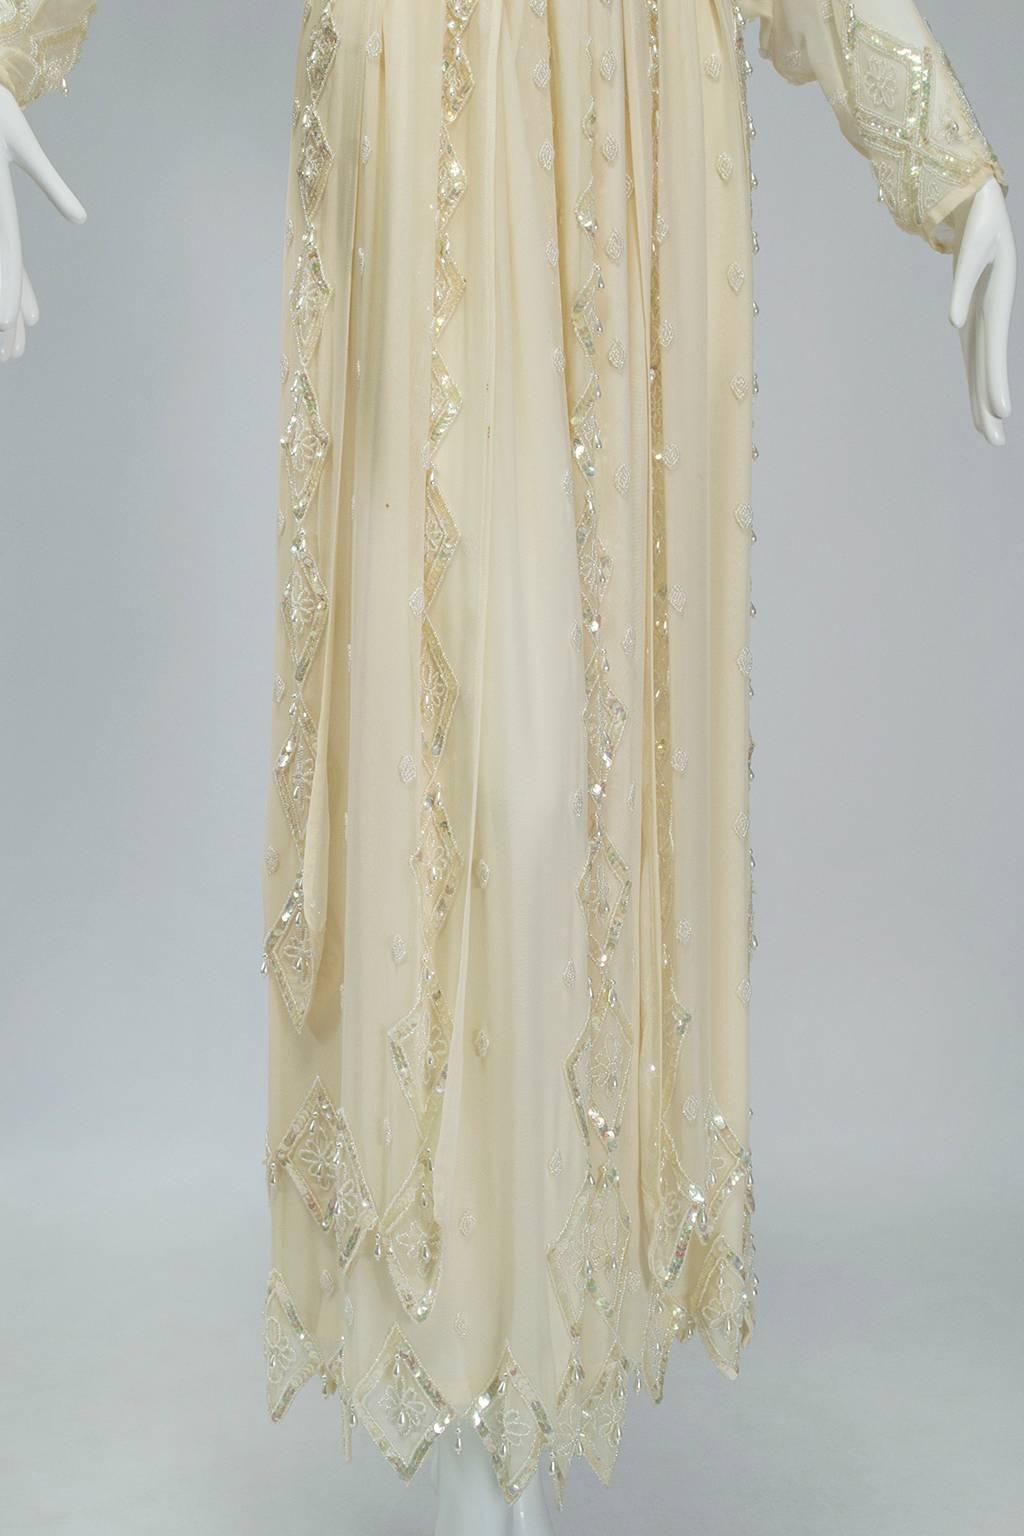 Ivory Edwardian Reproduction Ornamented Silk Tea or Bridal Gown - Small, 1980s 1